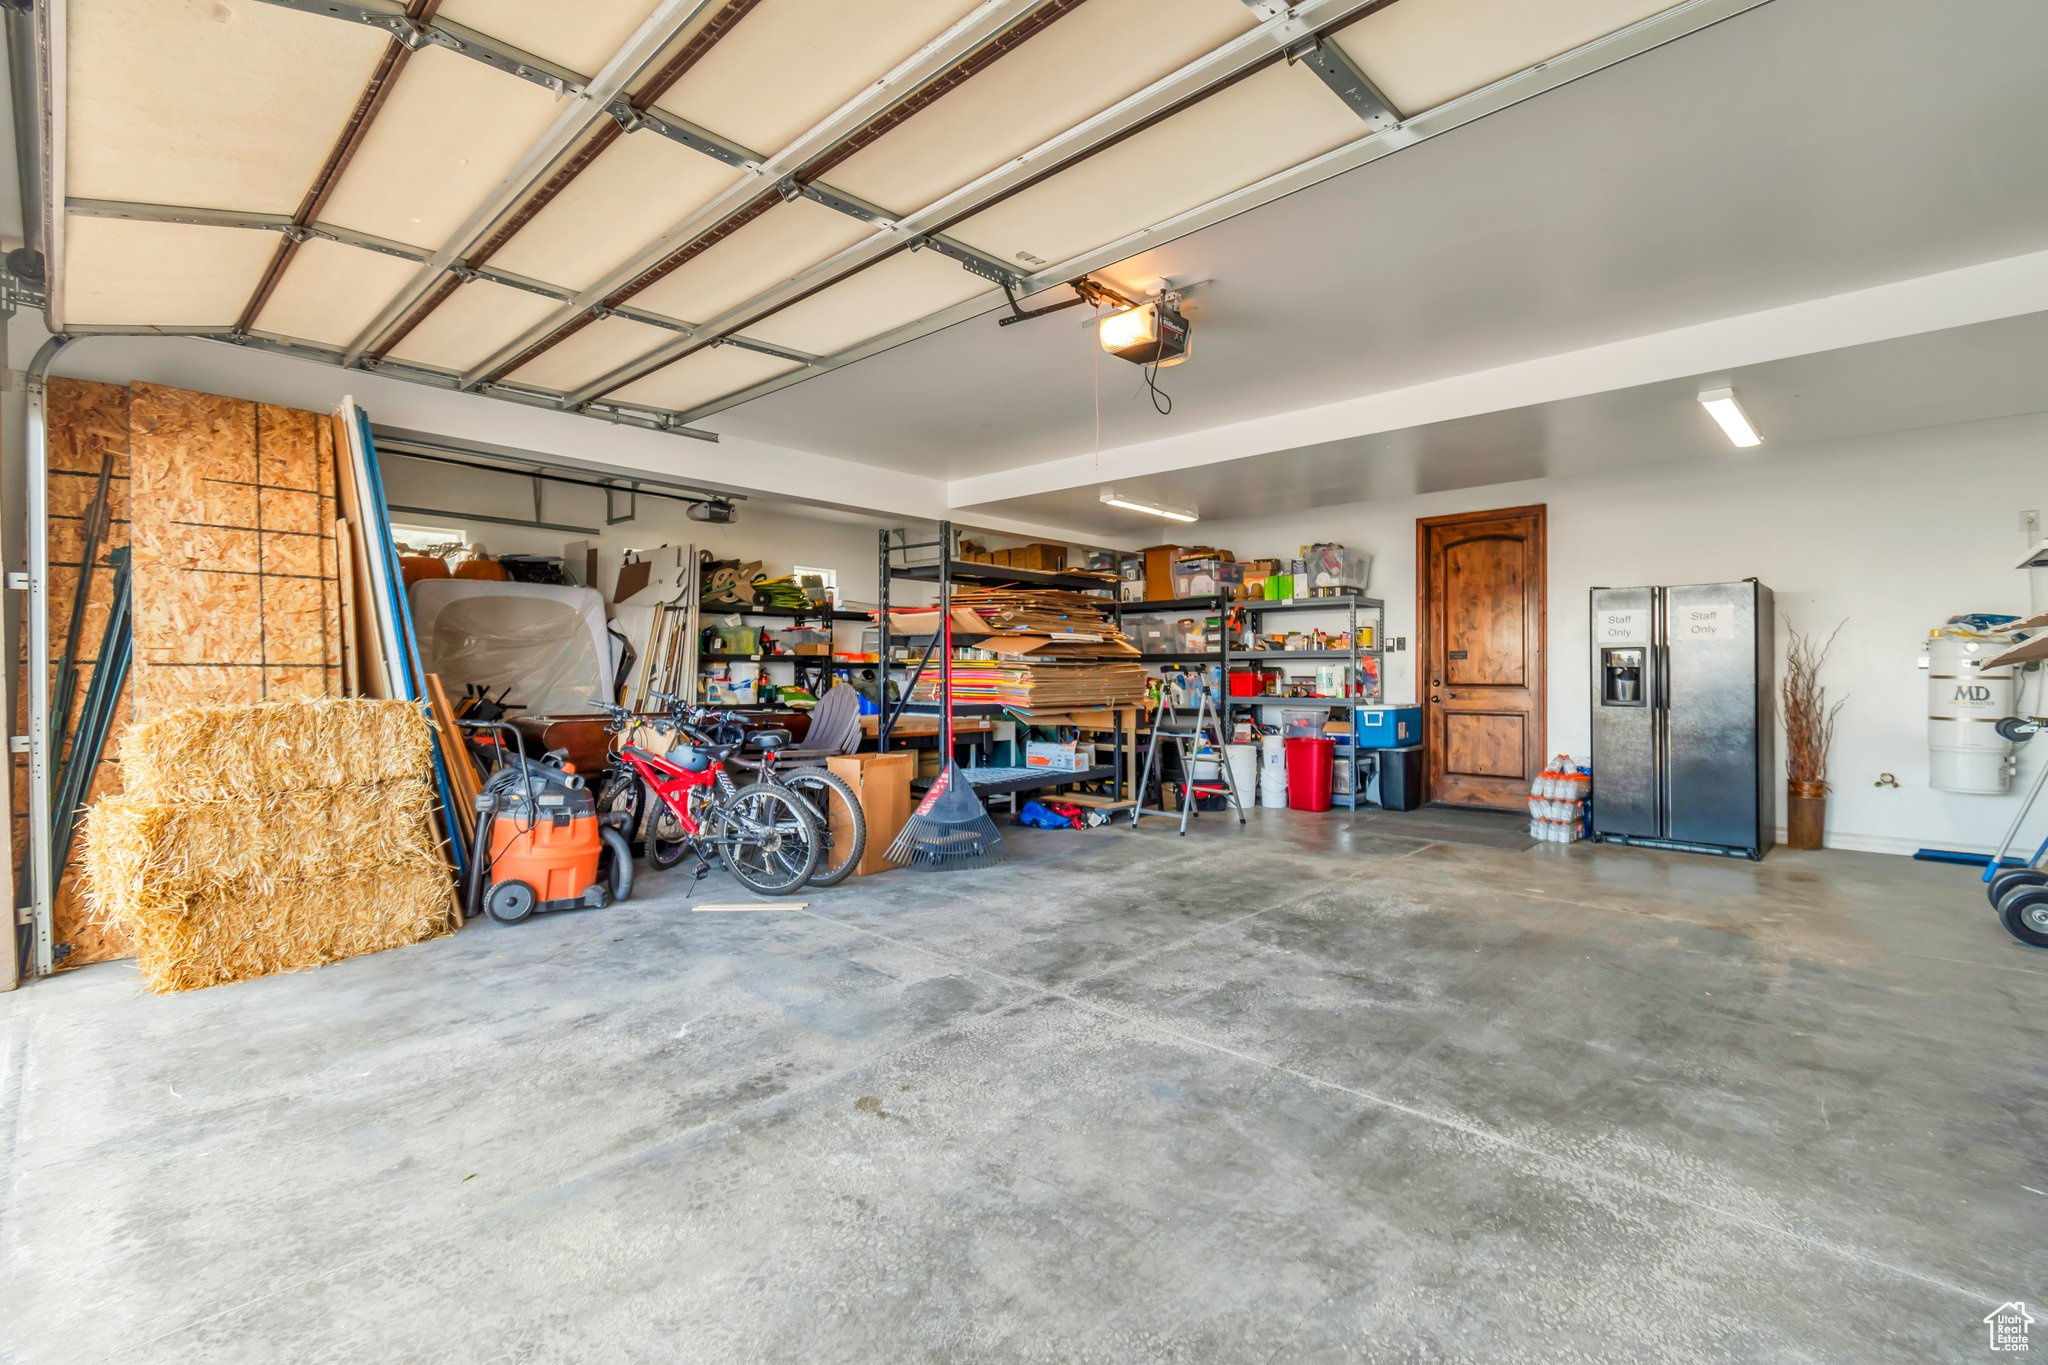 Garage featuring stainless steel fridge with ice dispenser, strapped water heater, and a garage door opener